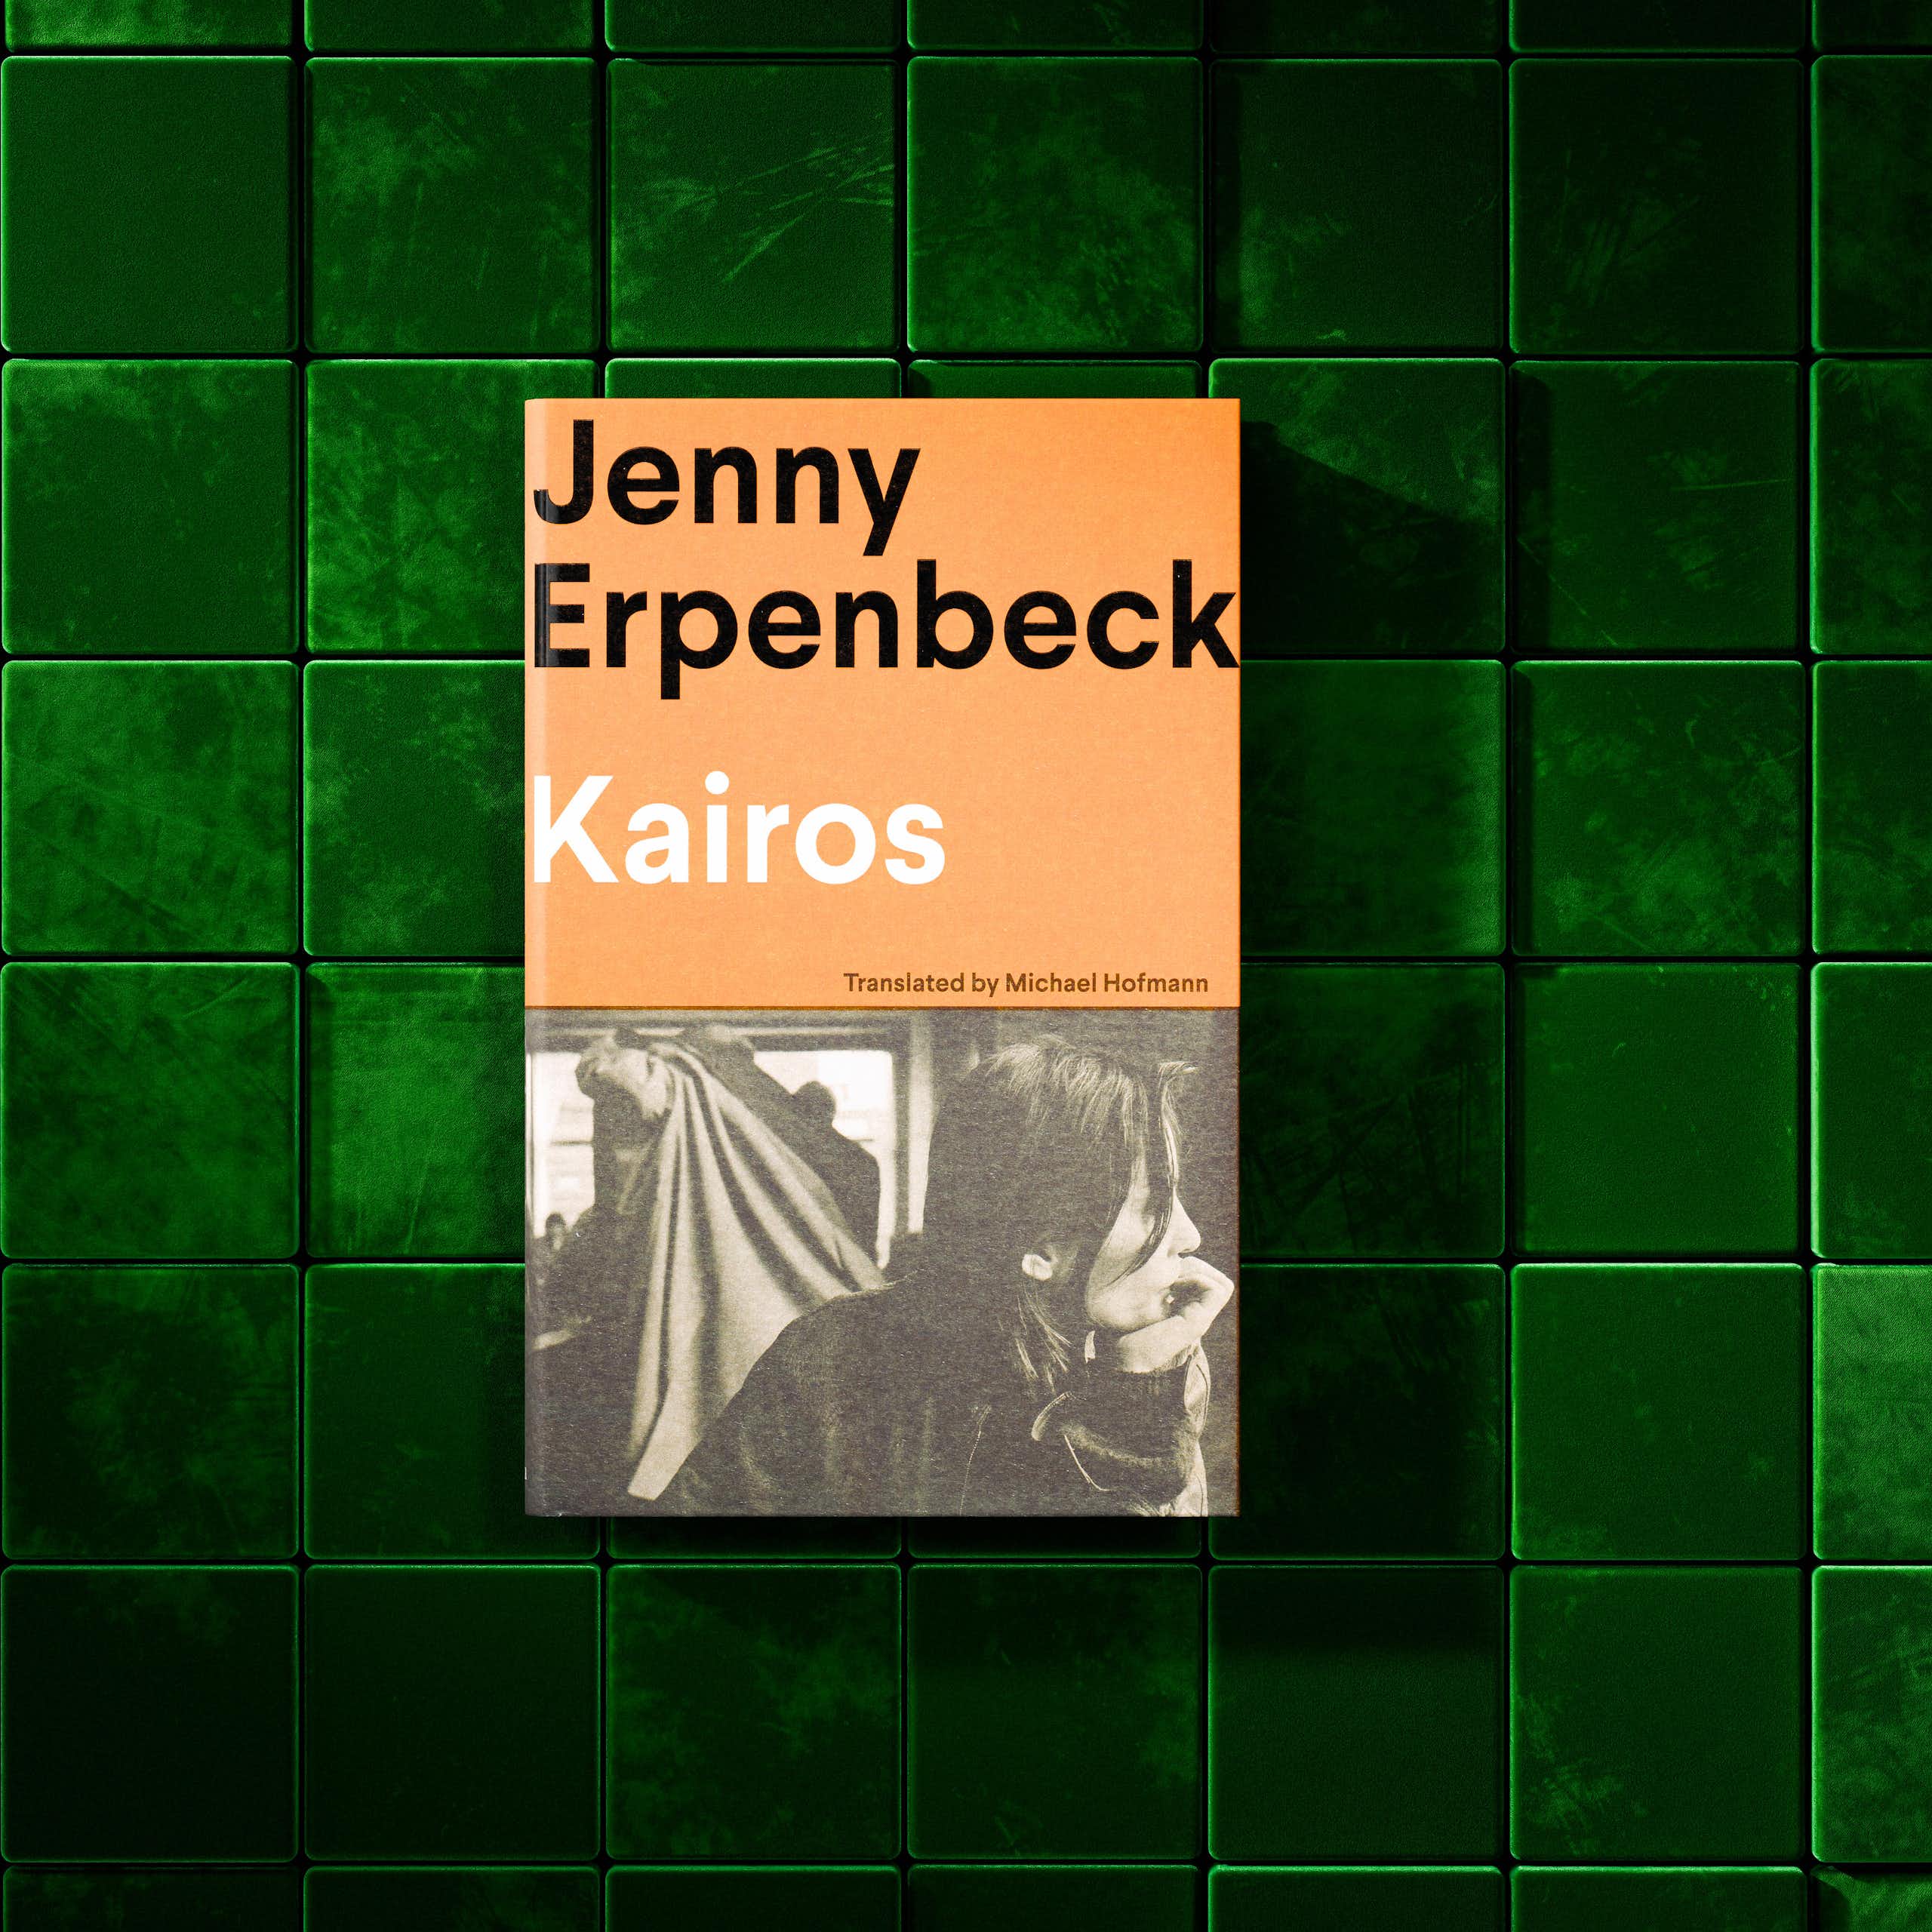 Book cover of Kairos by Jenny Erpenbeck.